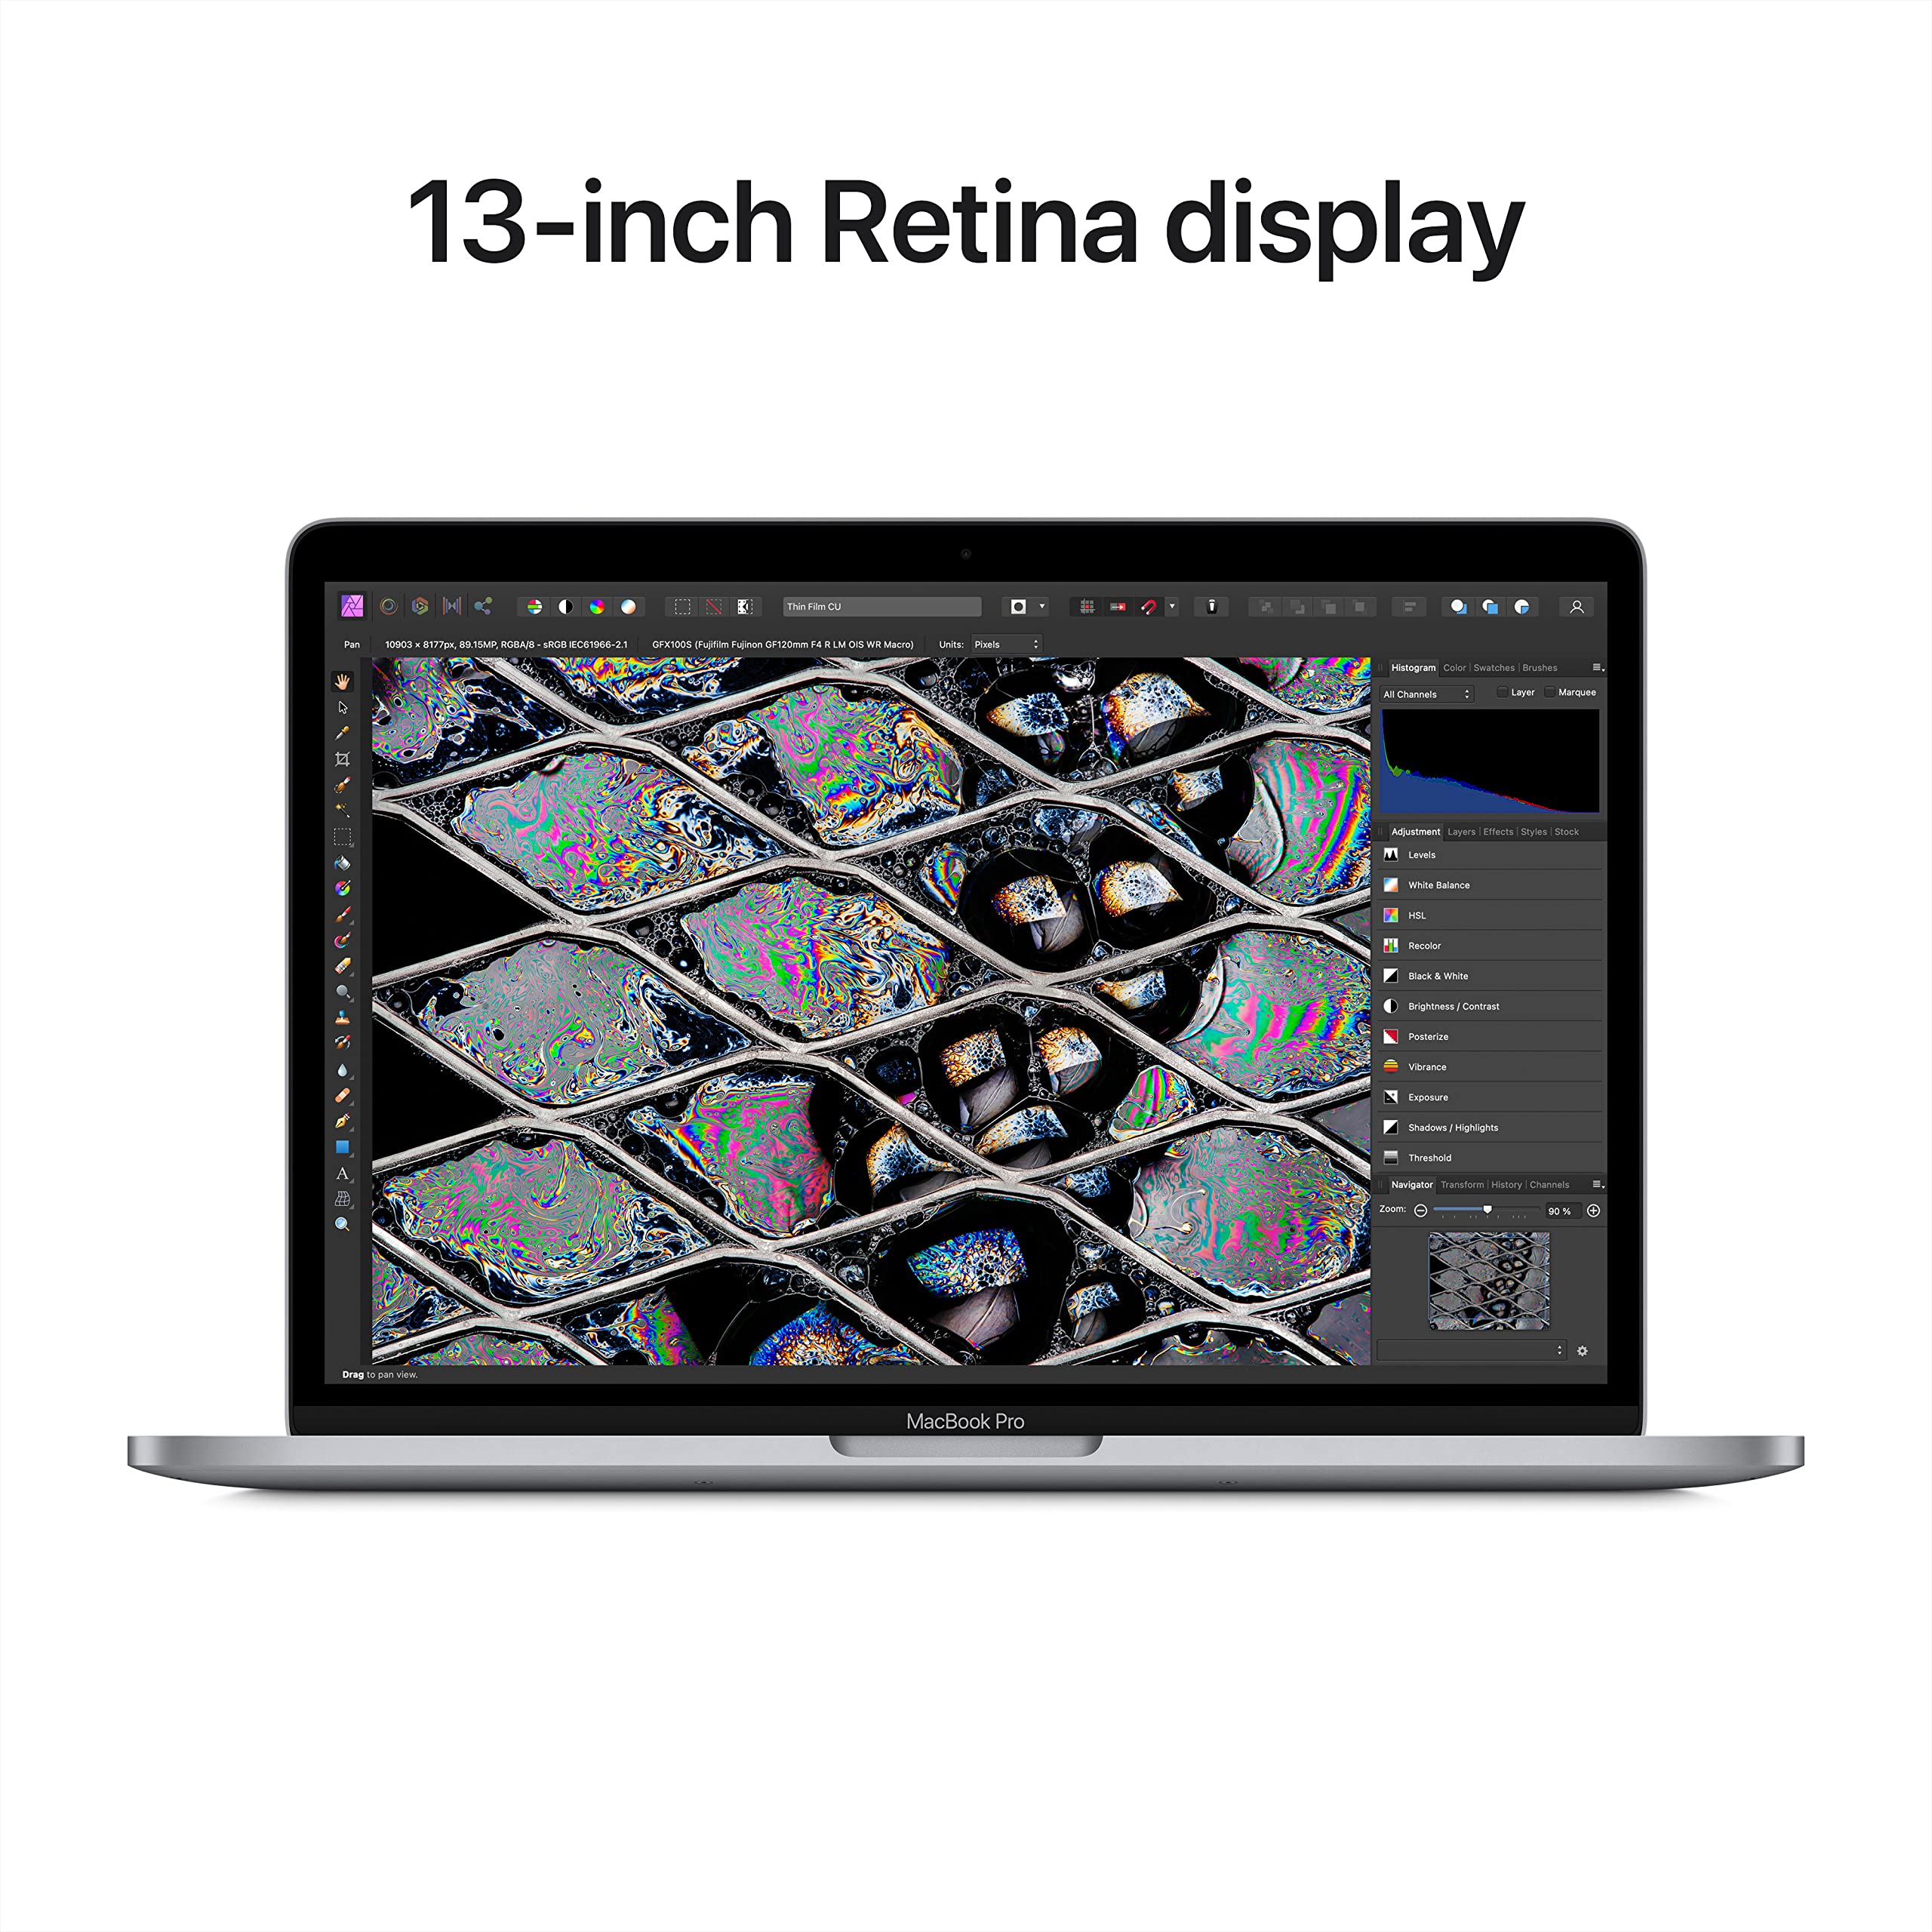 Apple 2022 MacBook Pro Laptop with M2 chip: 13-inch Retina Display, 8GB RAM, 512GB ​​​​​​​SSD ​​​​​​​Storage, Touch Bar, Backlit Keyboard, FaceTime HD Camera. Works with iPhone and iPad; Space Gray